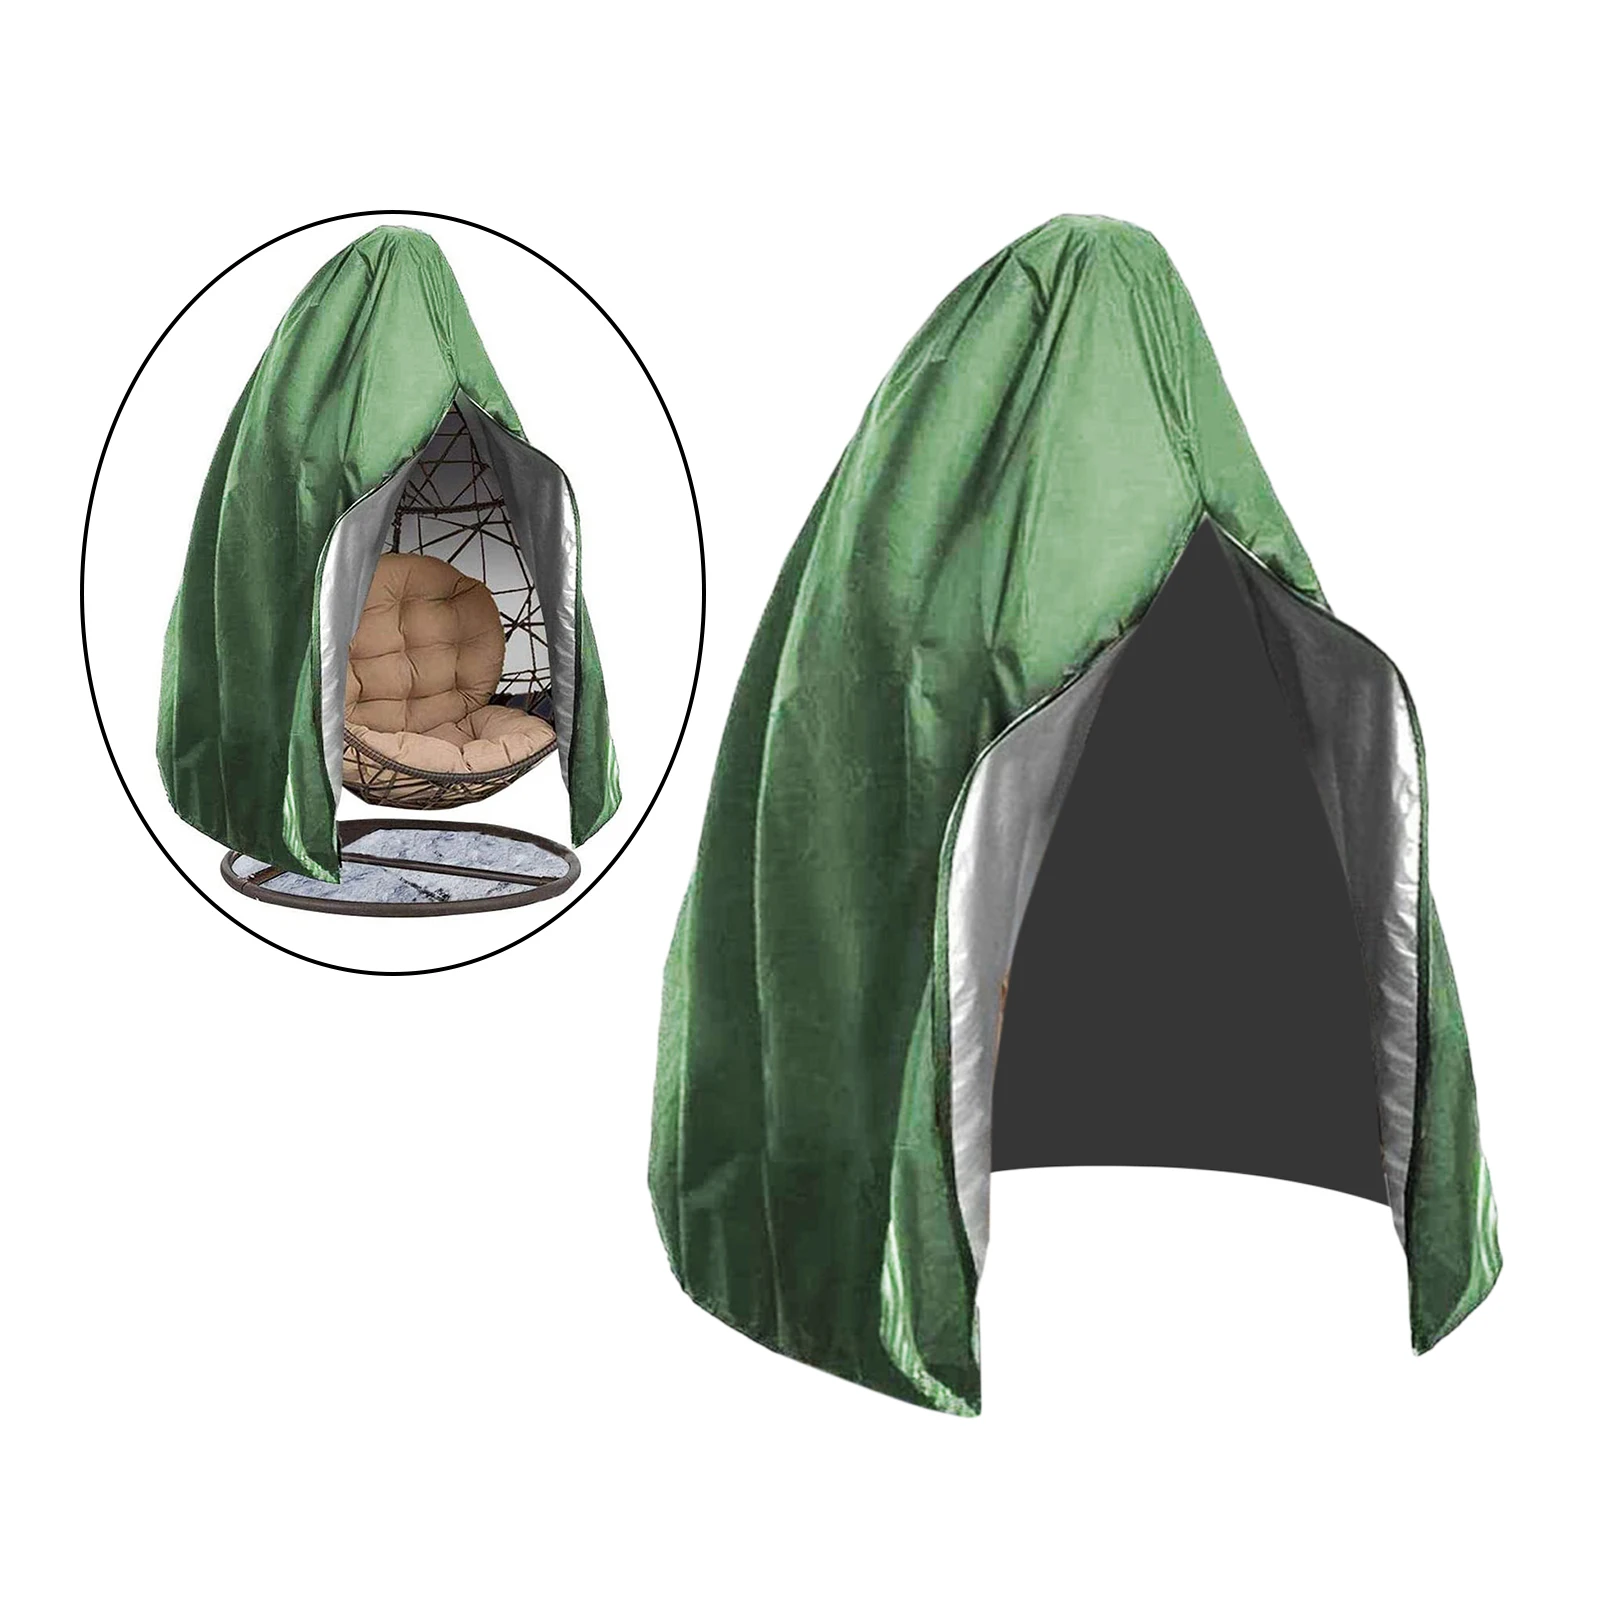 Waterproof Patio Chair Cover Egg Swing Chair Dust Cover Protector With Zipper Outdoor Hanging Egg Chairs Rain Cover